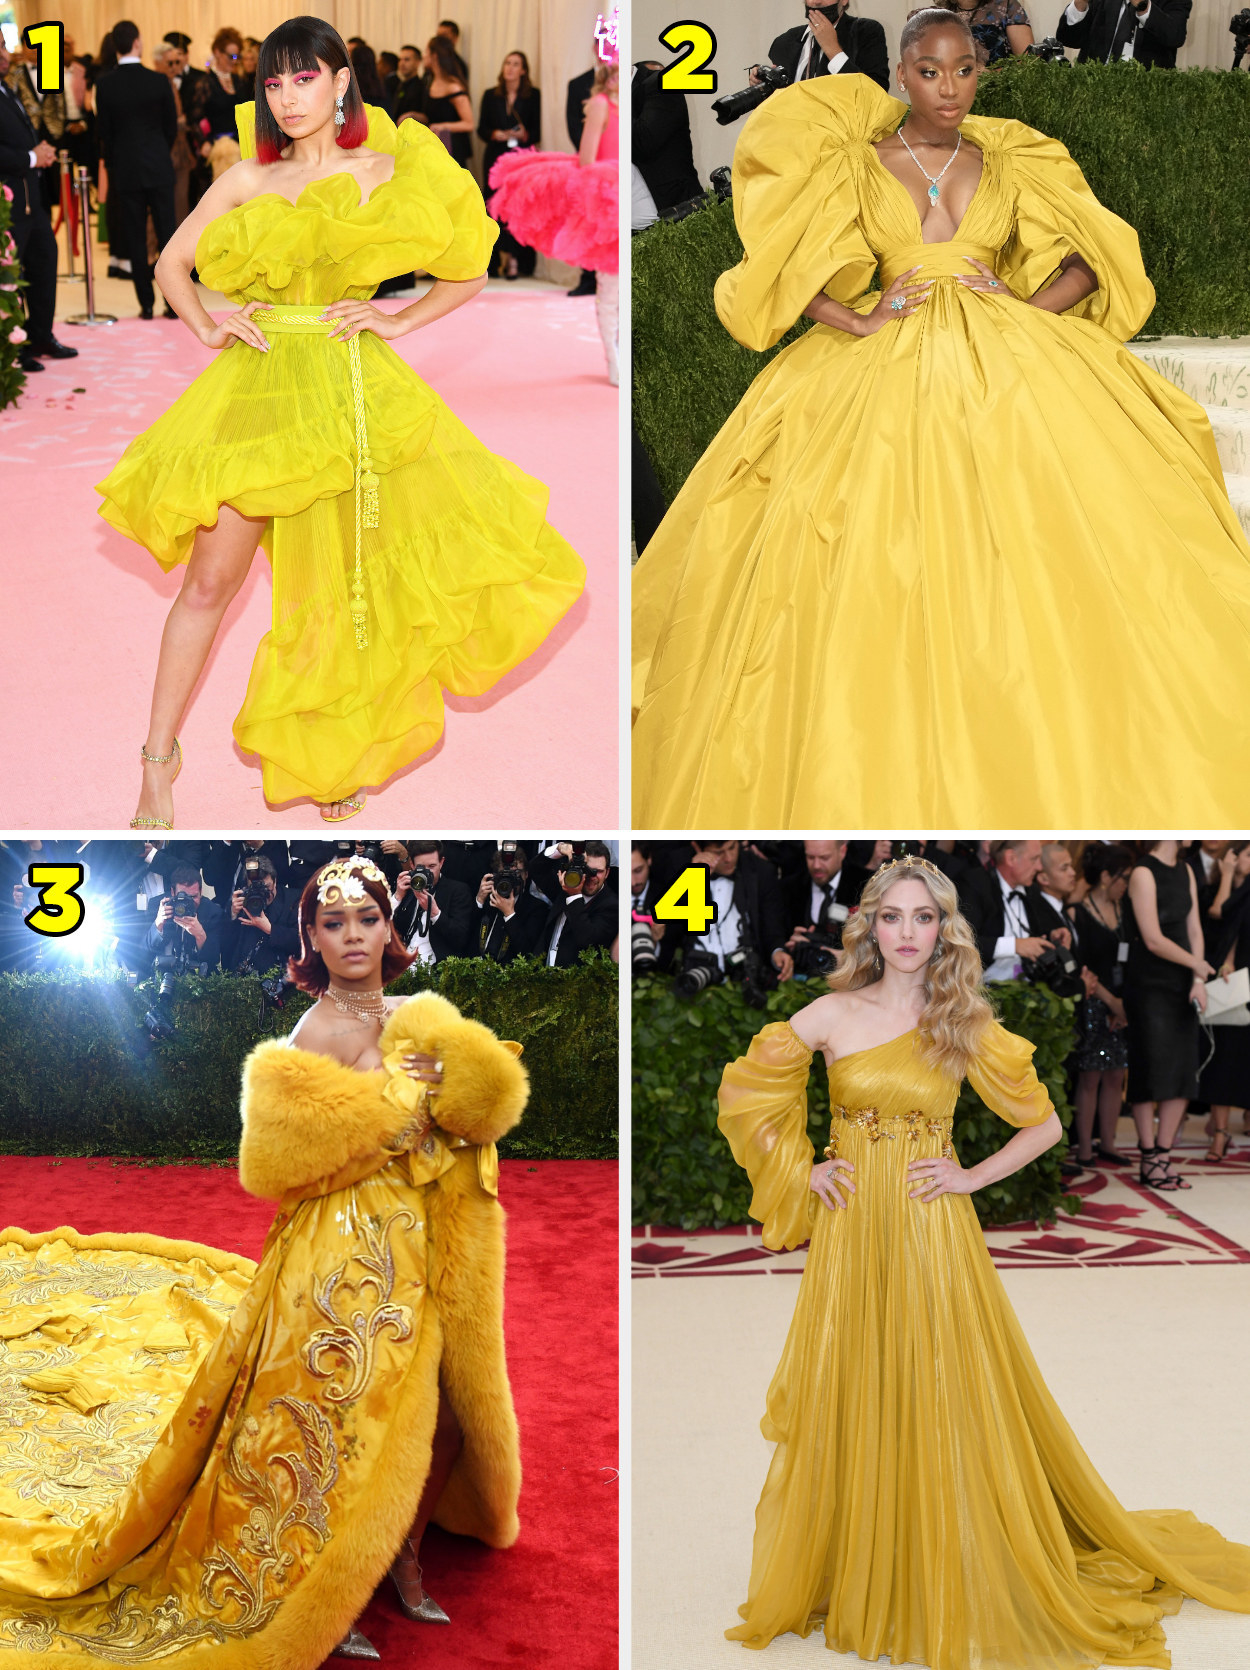 four different Met Gala looks worn by different women